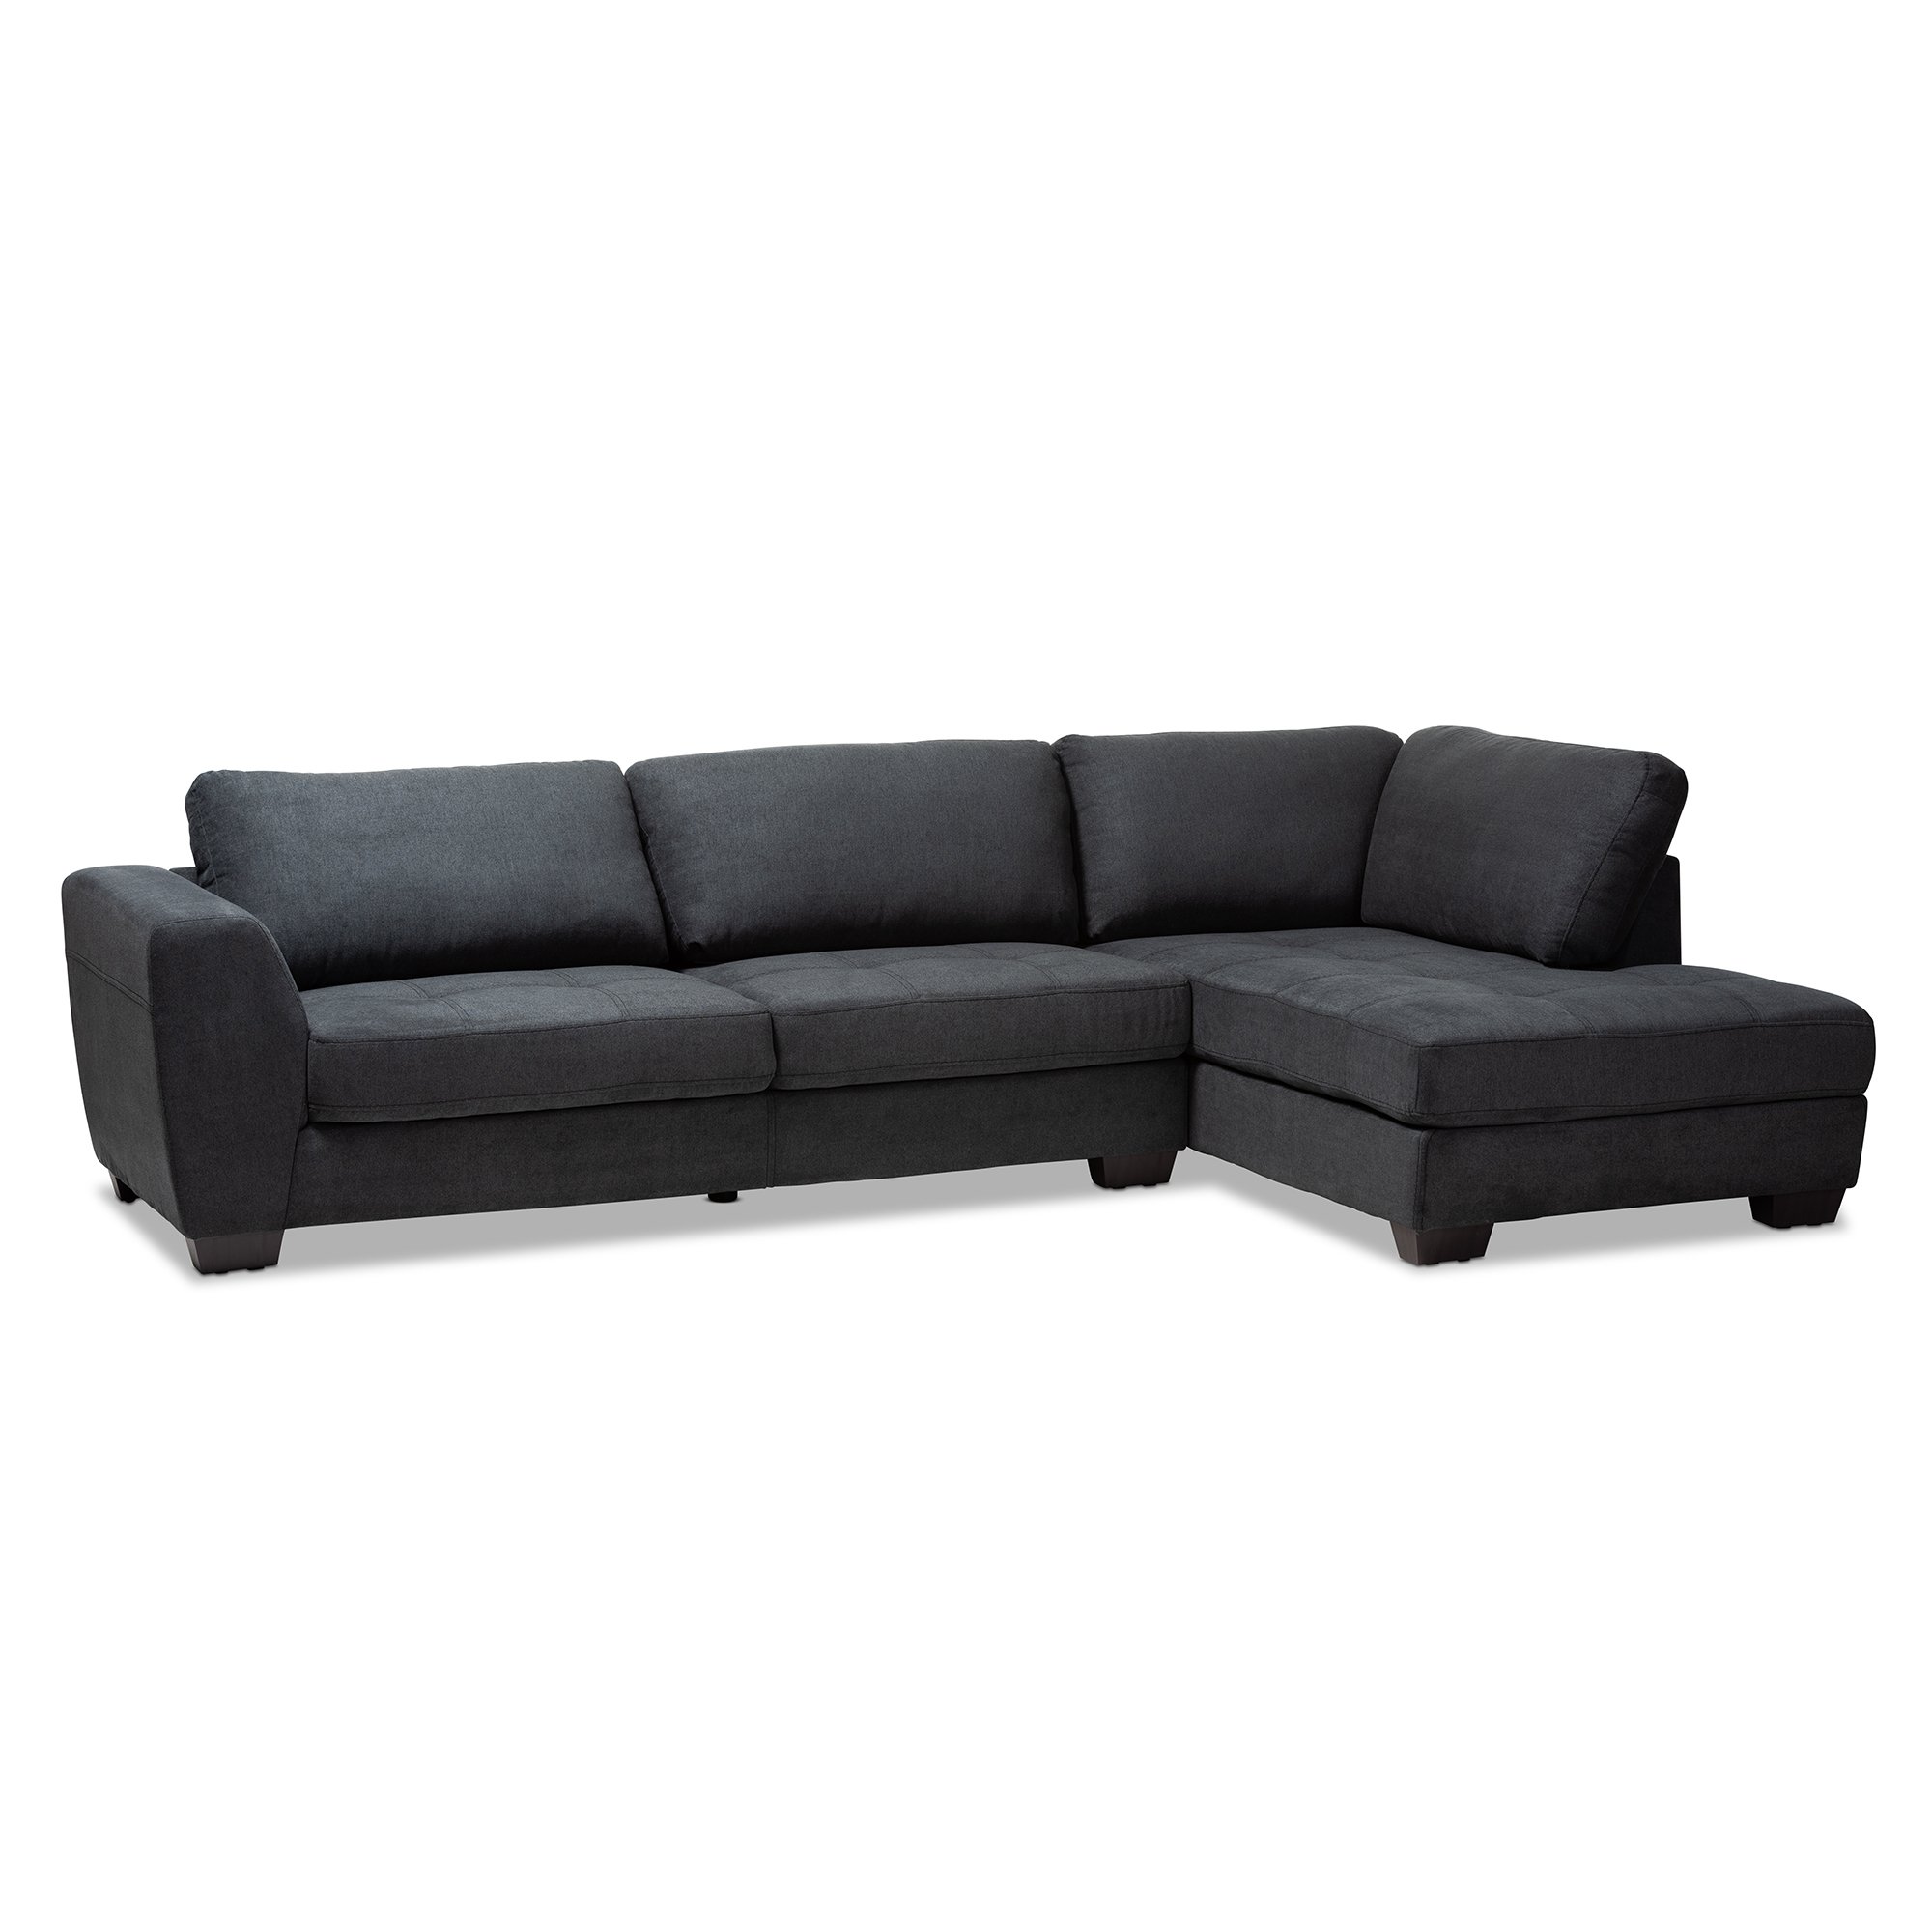 Baxton Studio Petra Modern and Contemporary Charcoal Fabric Upholstered Right Facing Sectional Sofa